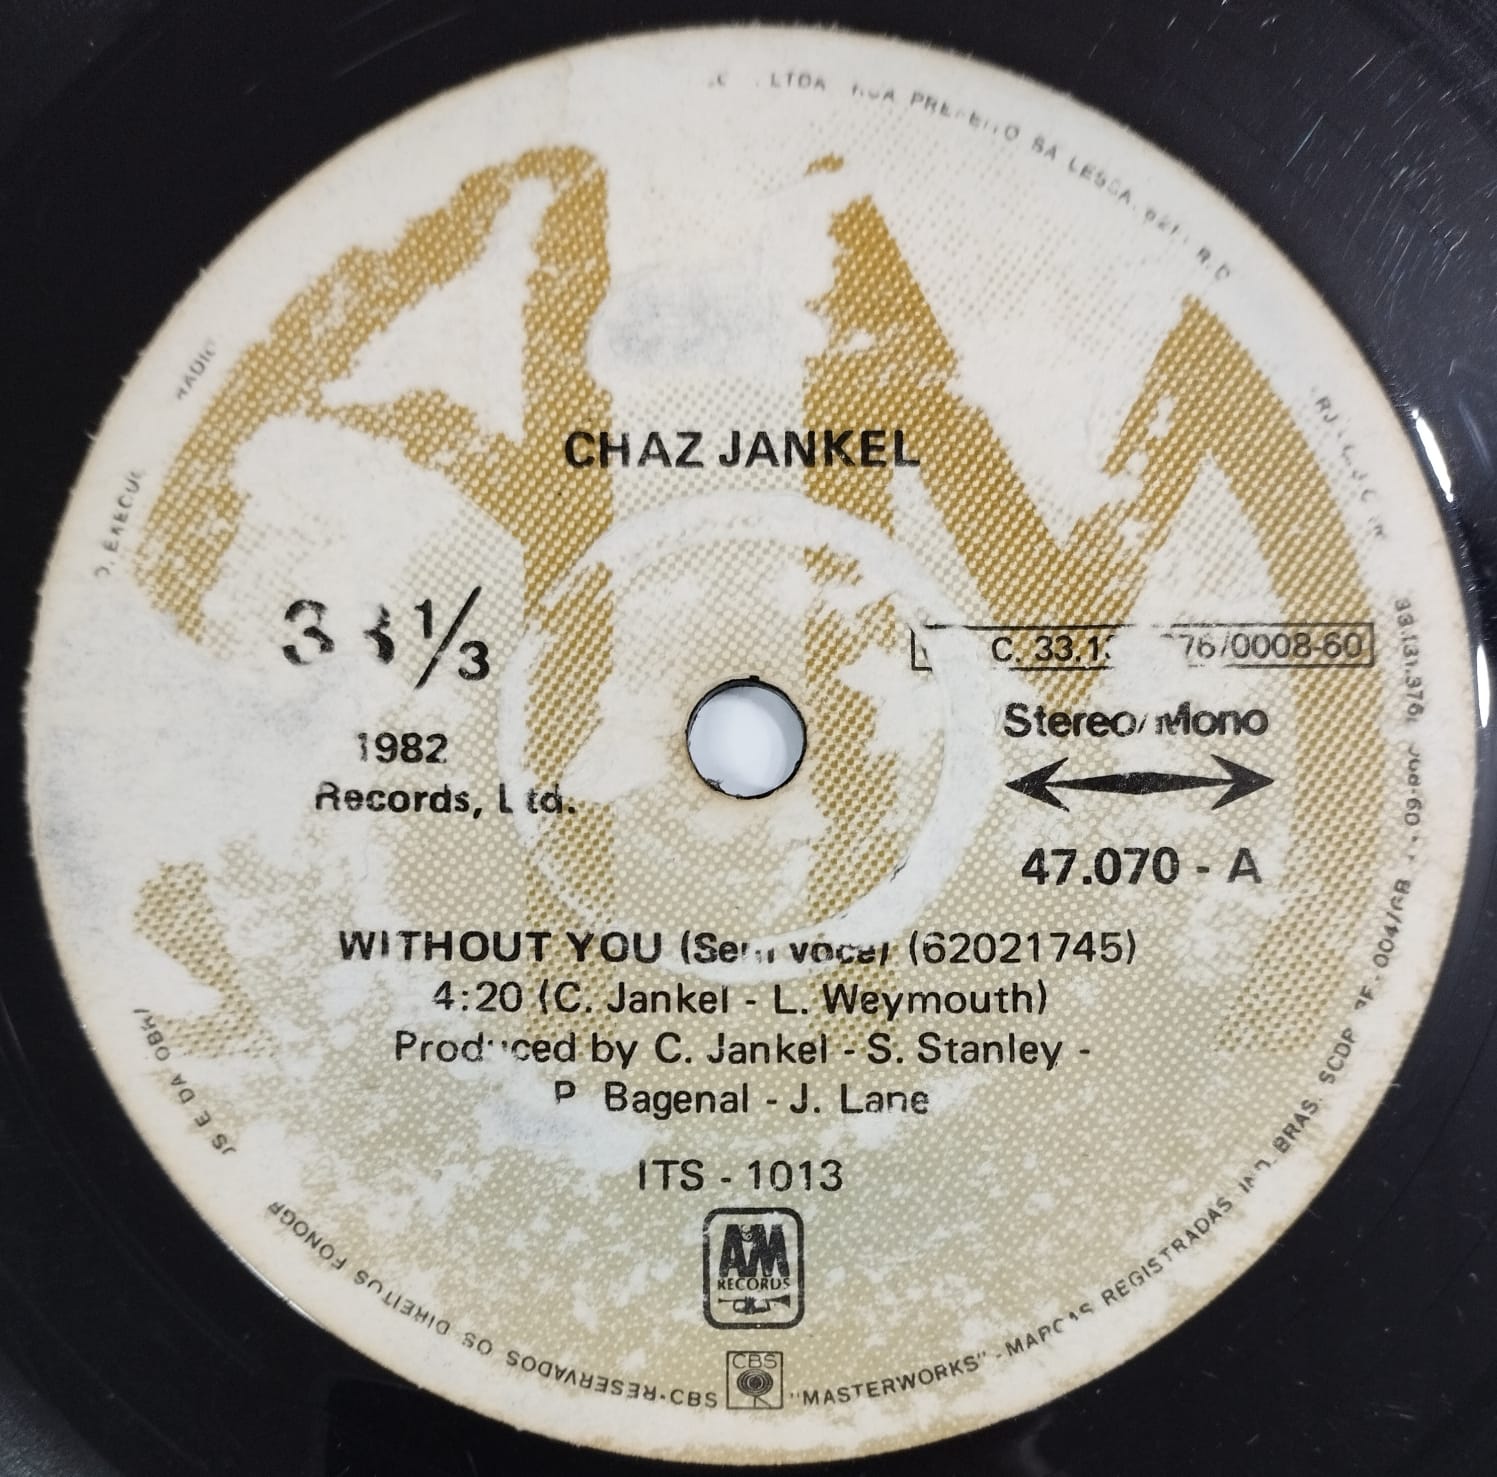 Chaz Jankel - Without You (Compacto)